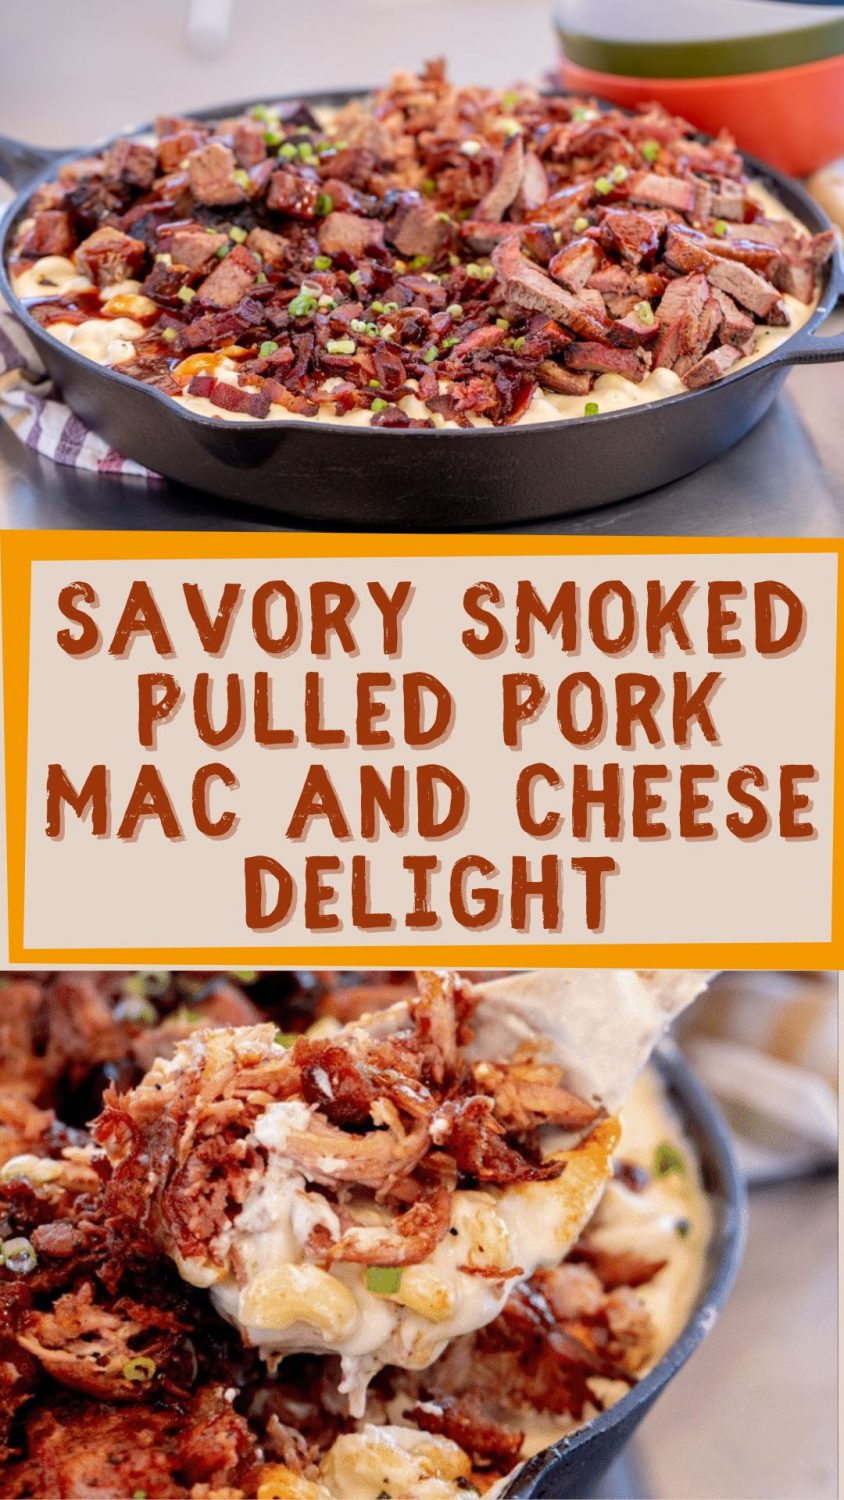 Savory Smoked Pulled Pork Mac and Cheese Delight